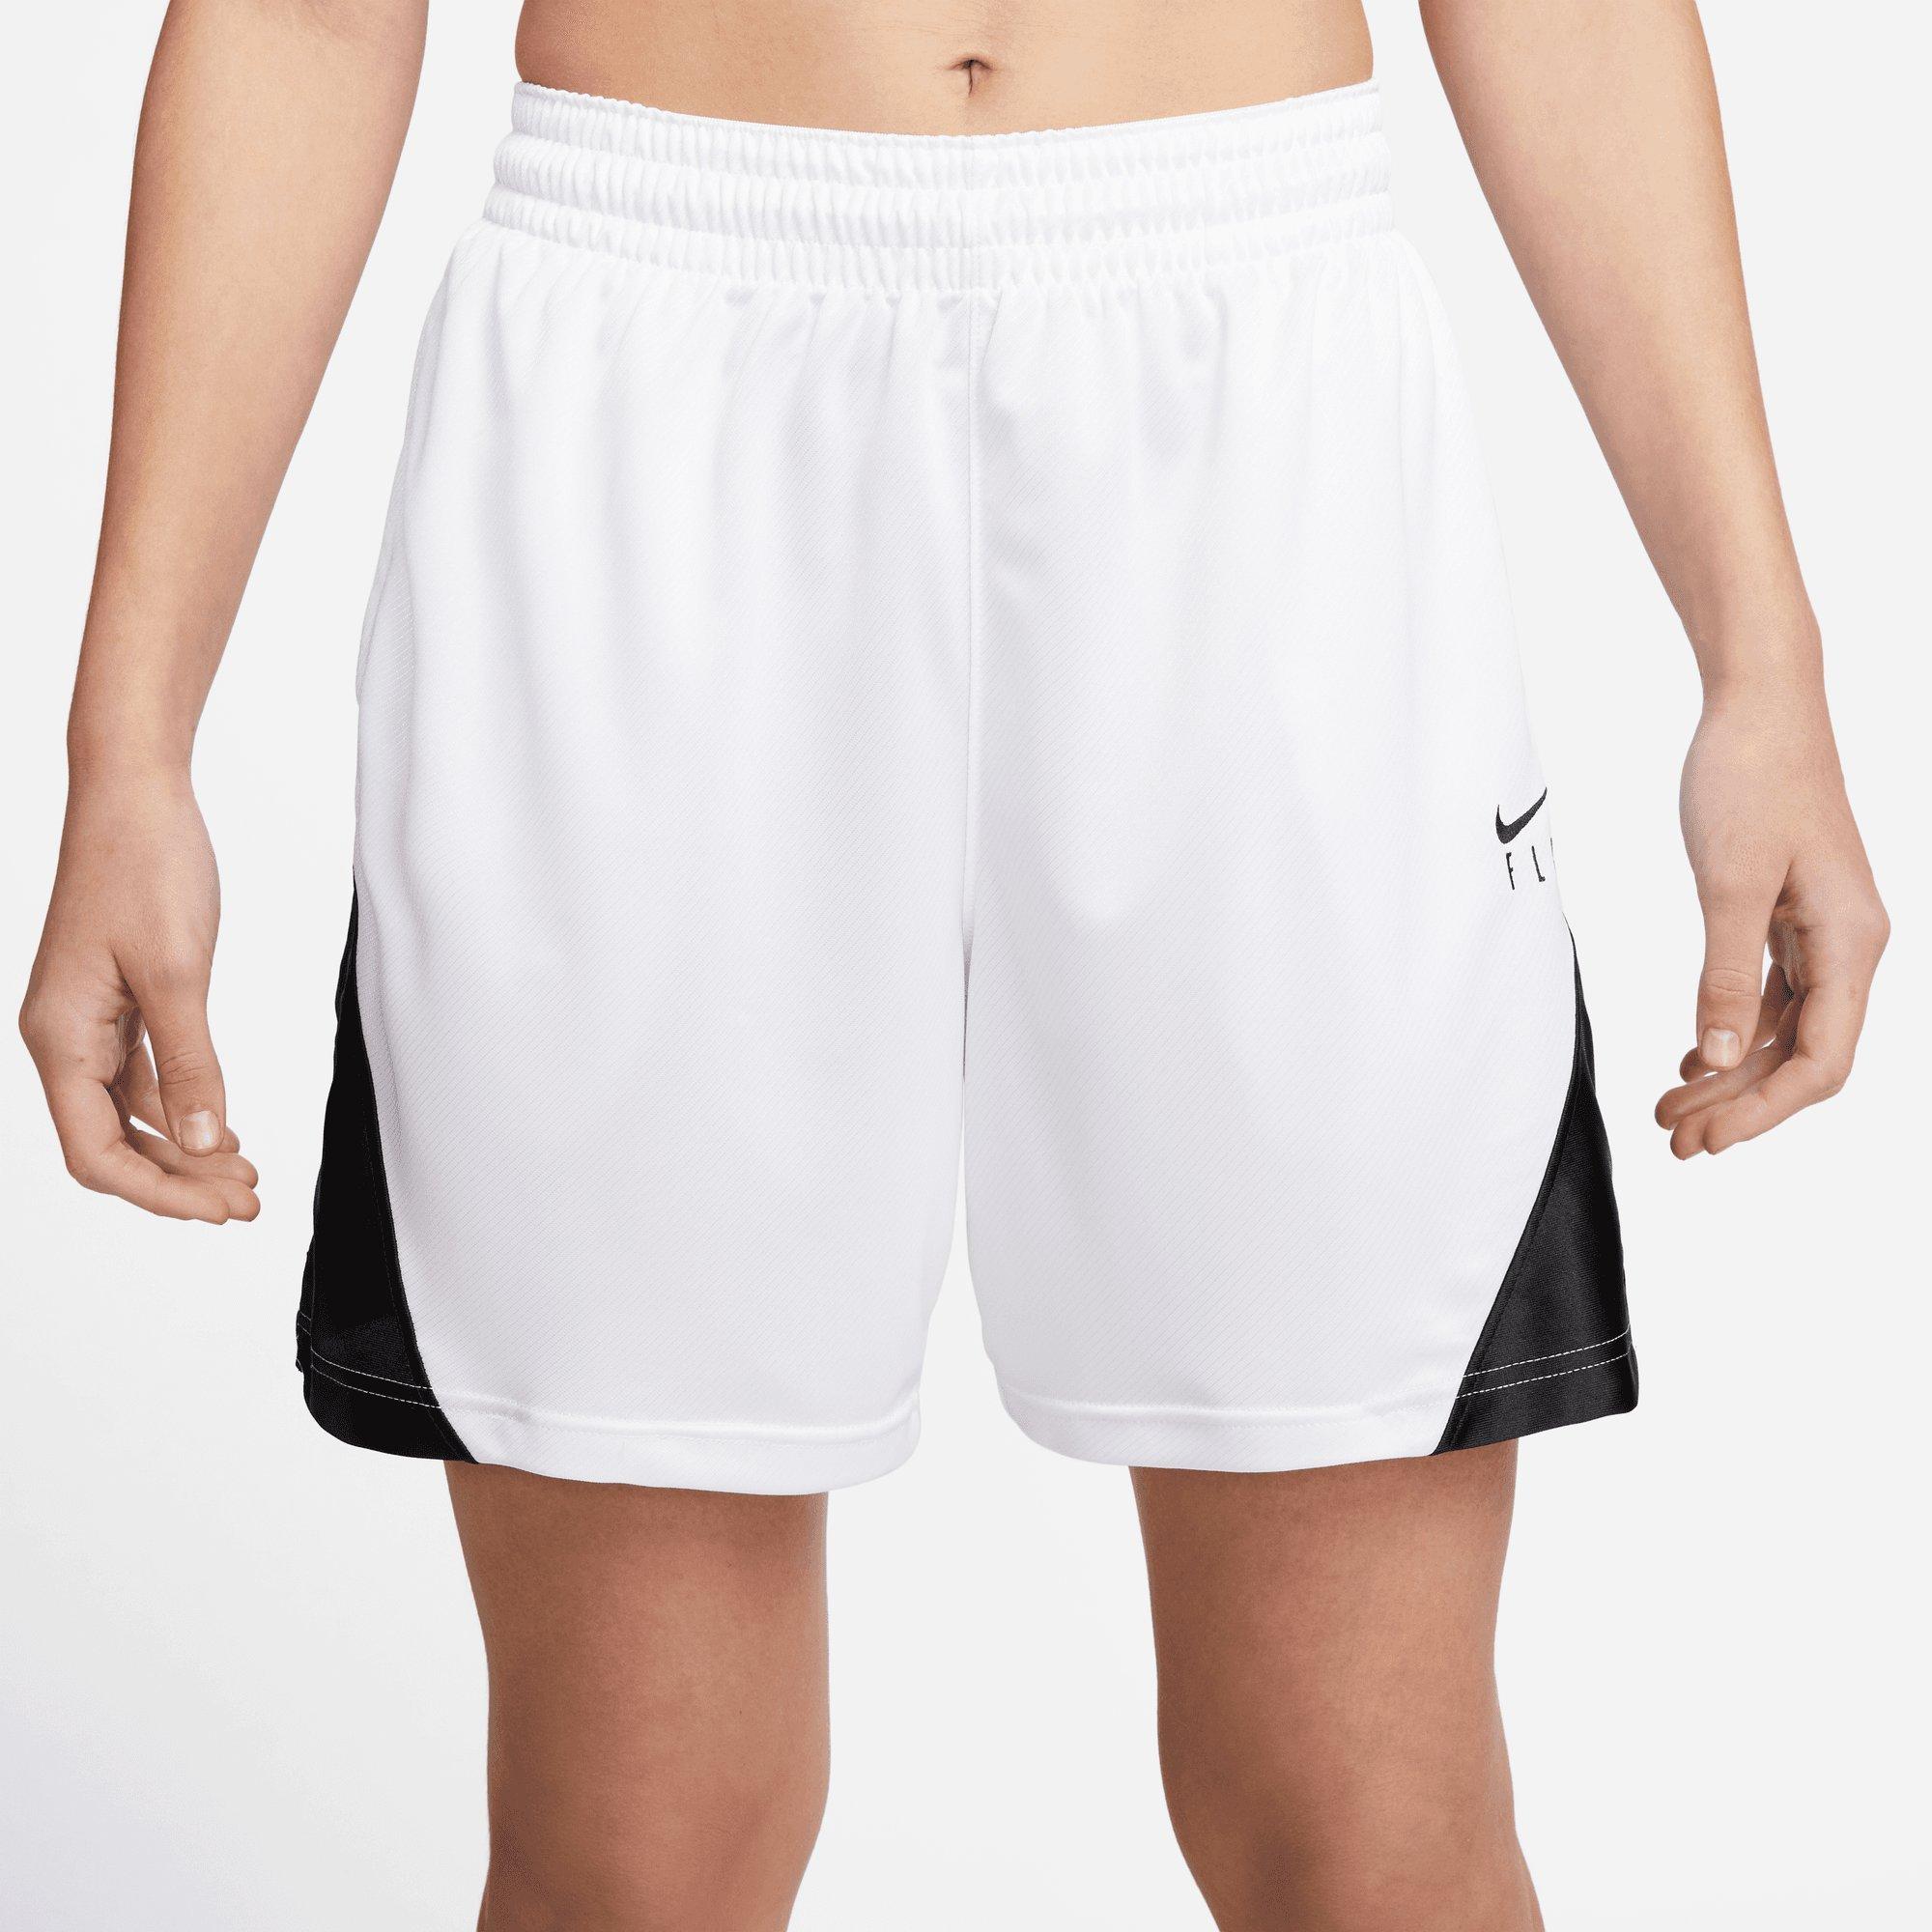 Women's Fly Crossover Shorts from Nike